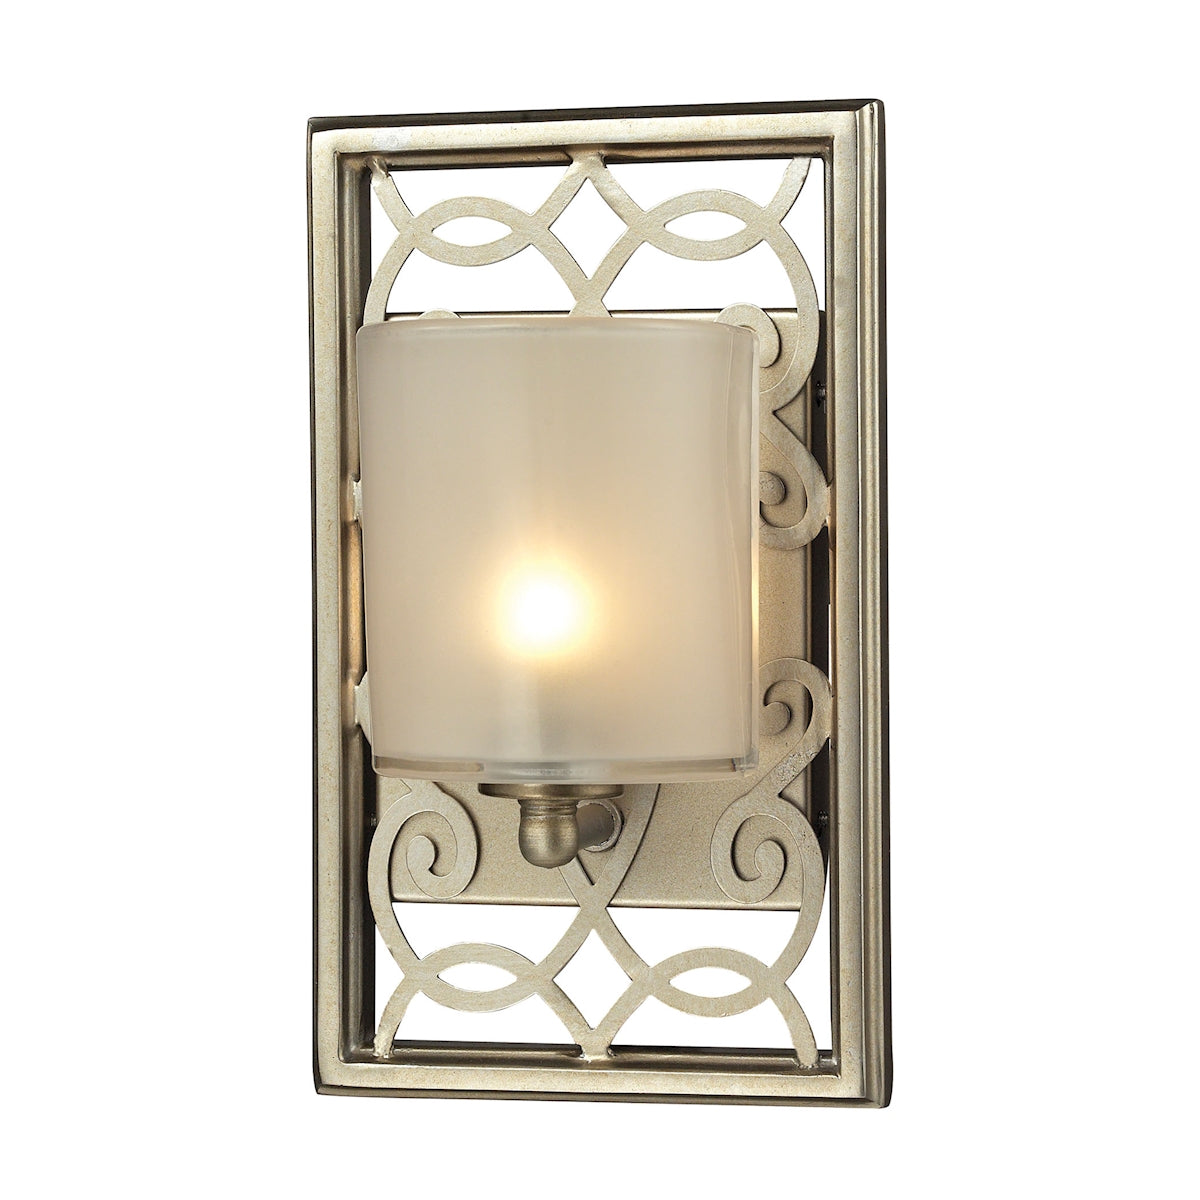 ELK Lighting 31426/1 Santa Monica 1-Light Vanity Sconce in Aged Silver with Off-white Glass